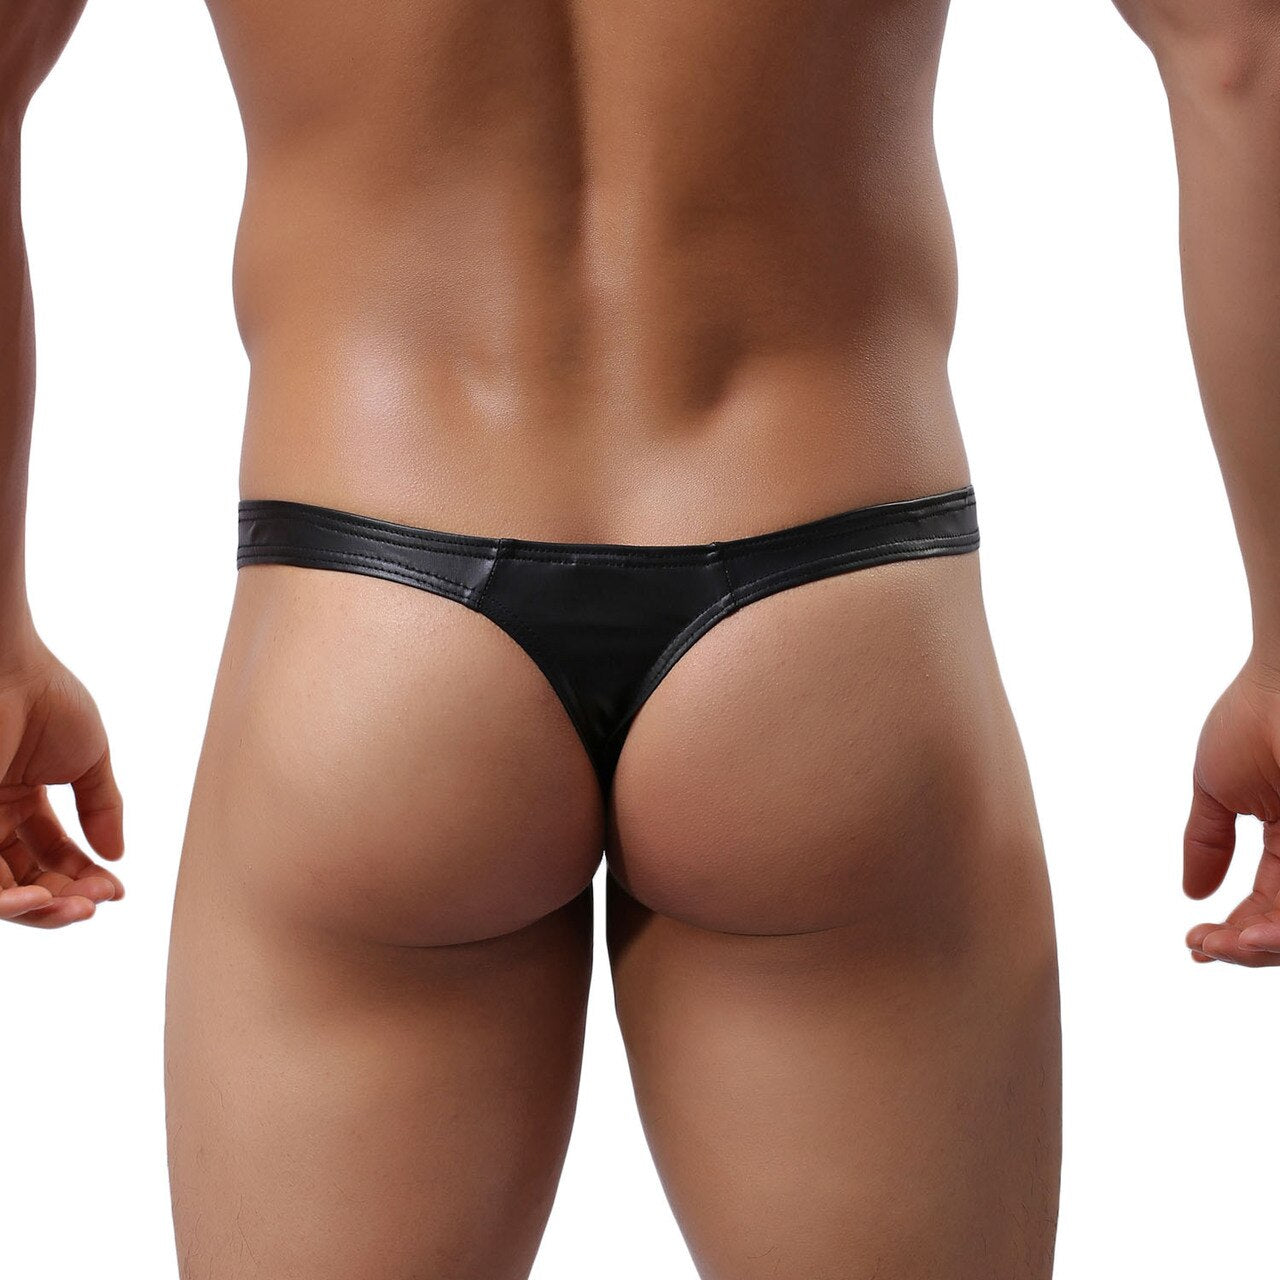 Mens Wetlook Low Waist Thong with Pouch Front Black